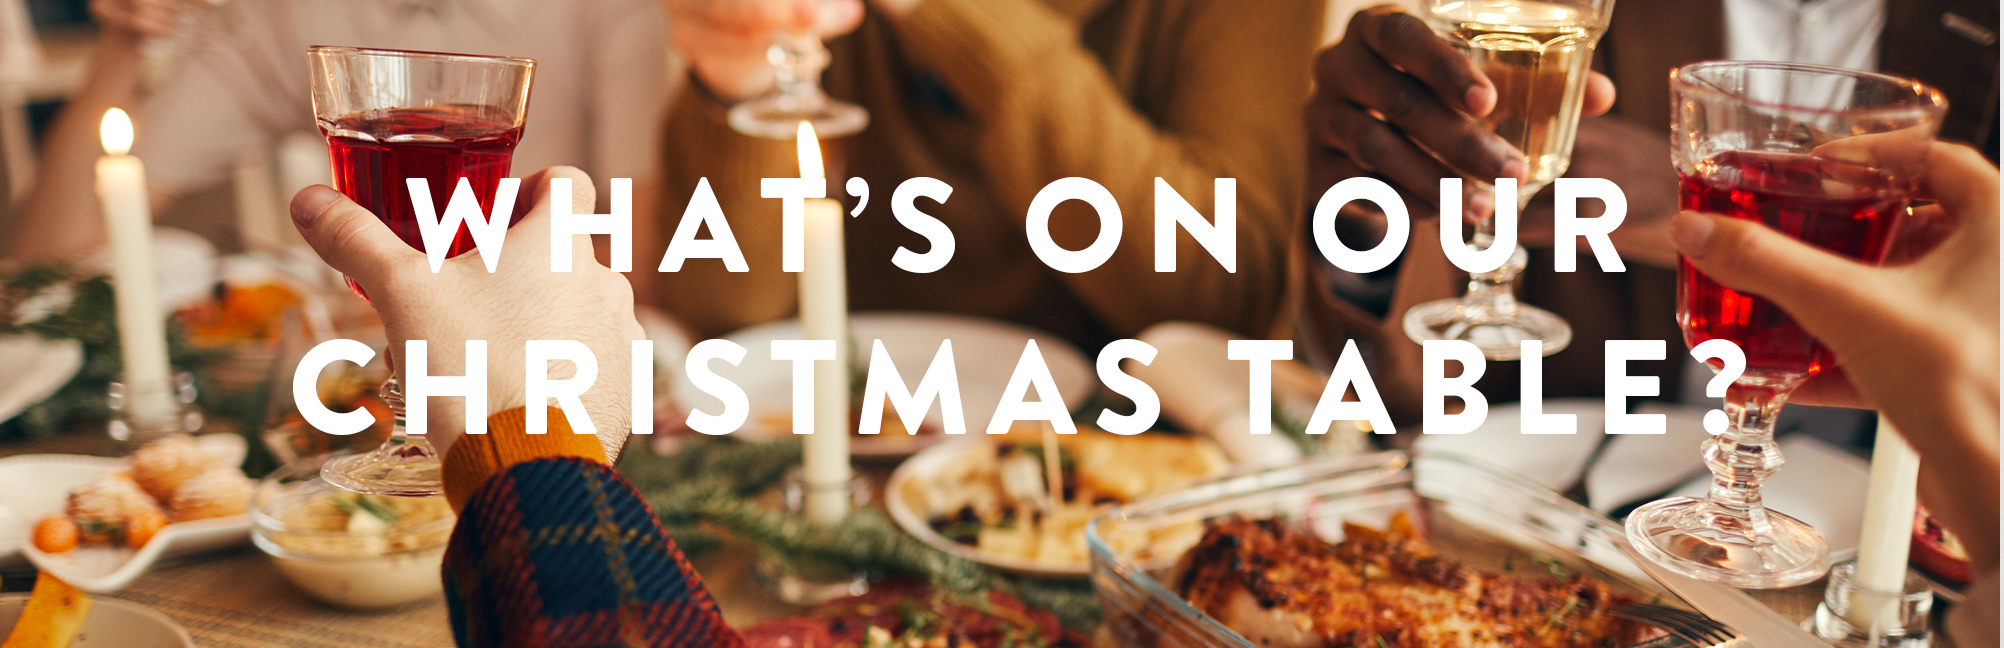 What's on our Christmas table?